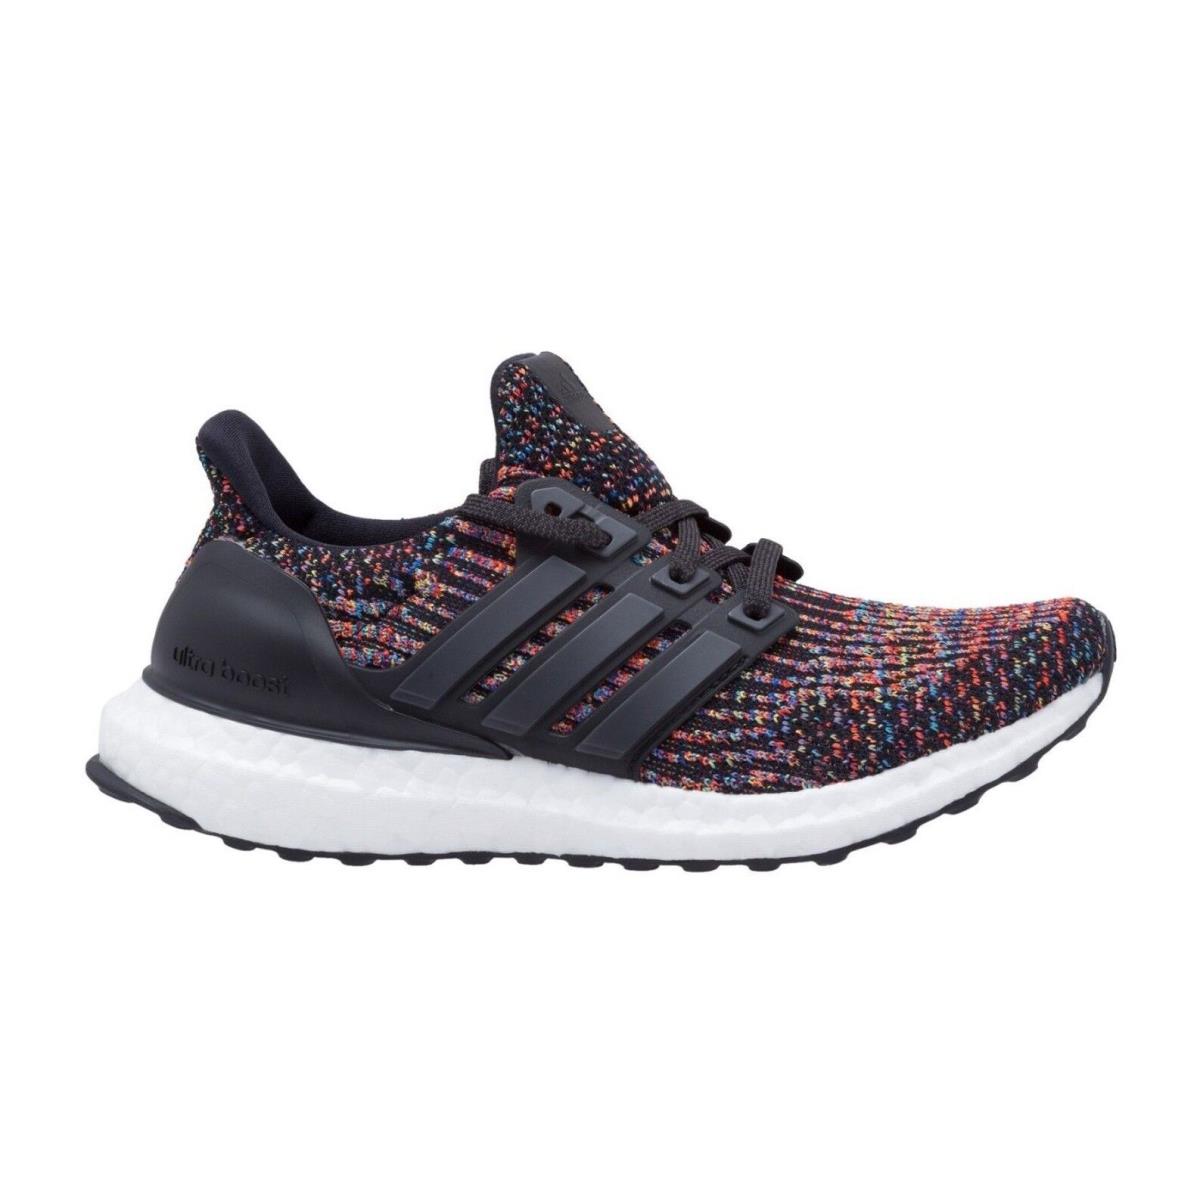 Adidas Ultraboost J Core Black Multicolor Running BY2075 440 Youth Shoes - Multicolor